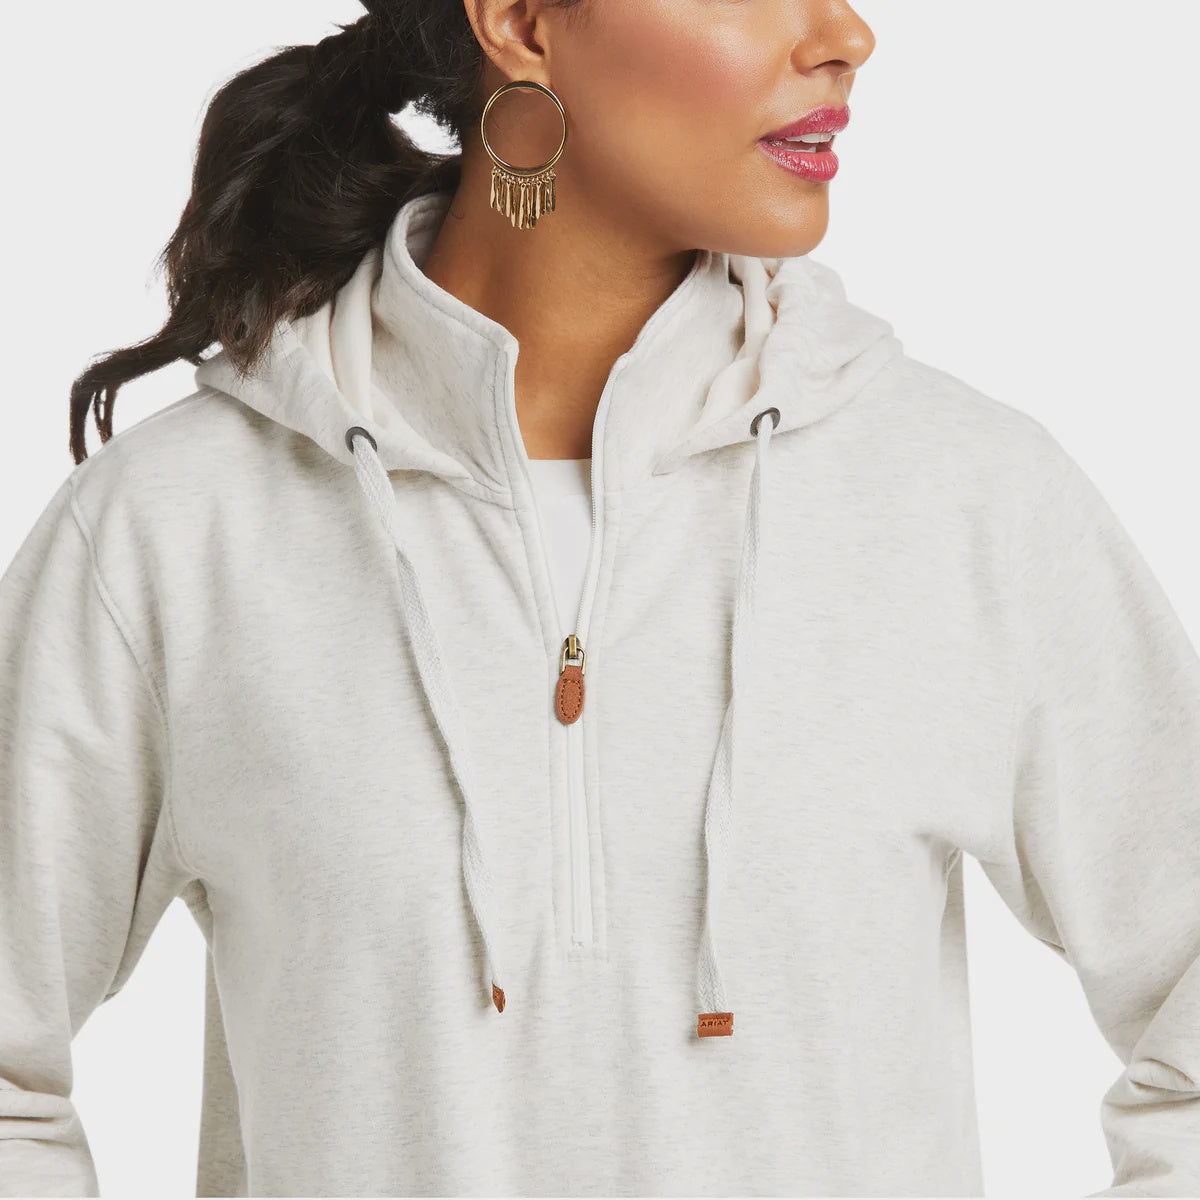 Womens Ariat REAL Elevated Hoodie - White Sand Heather (6759805190221)